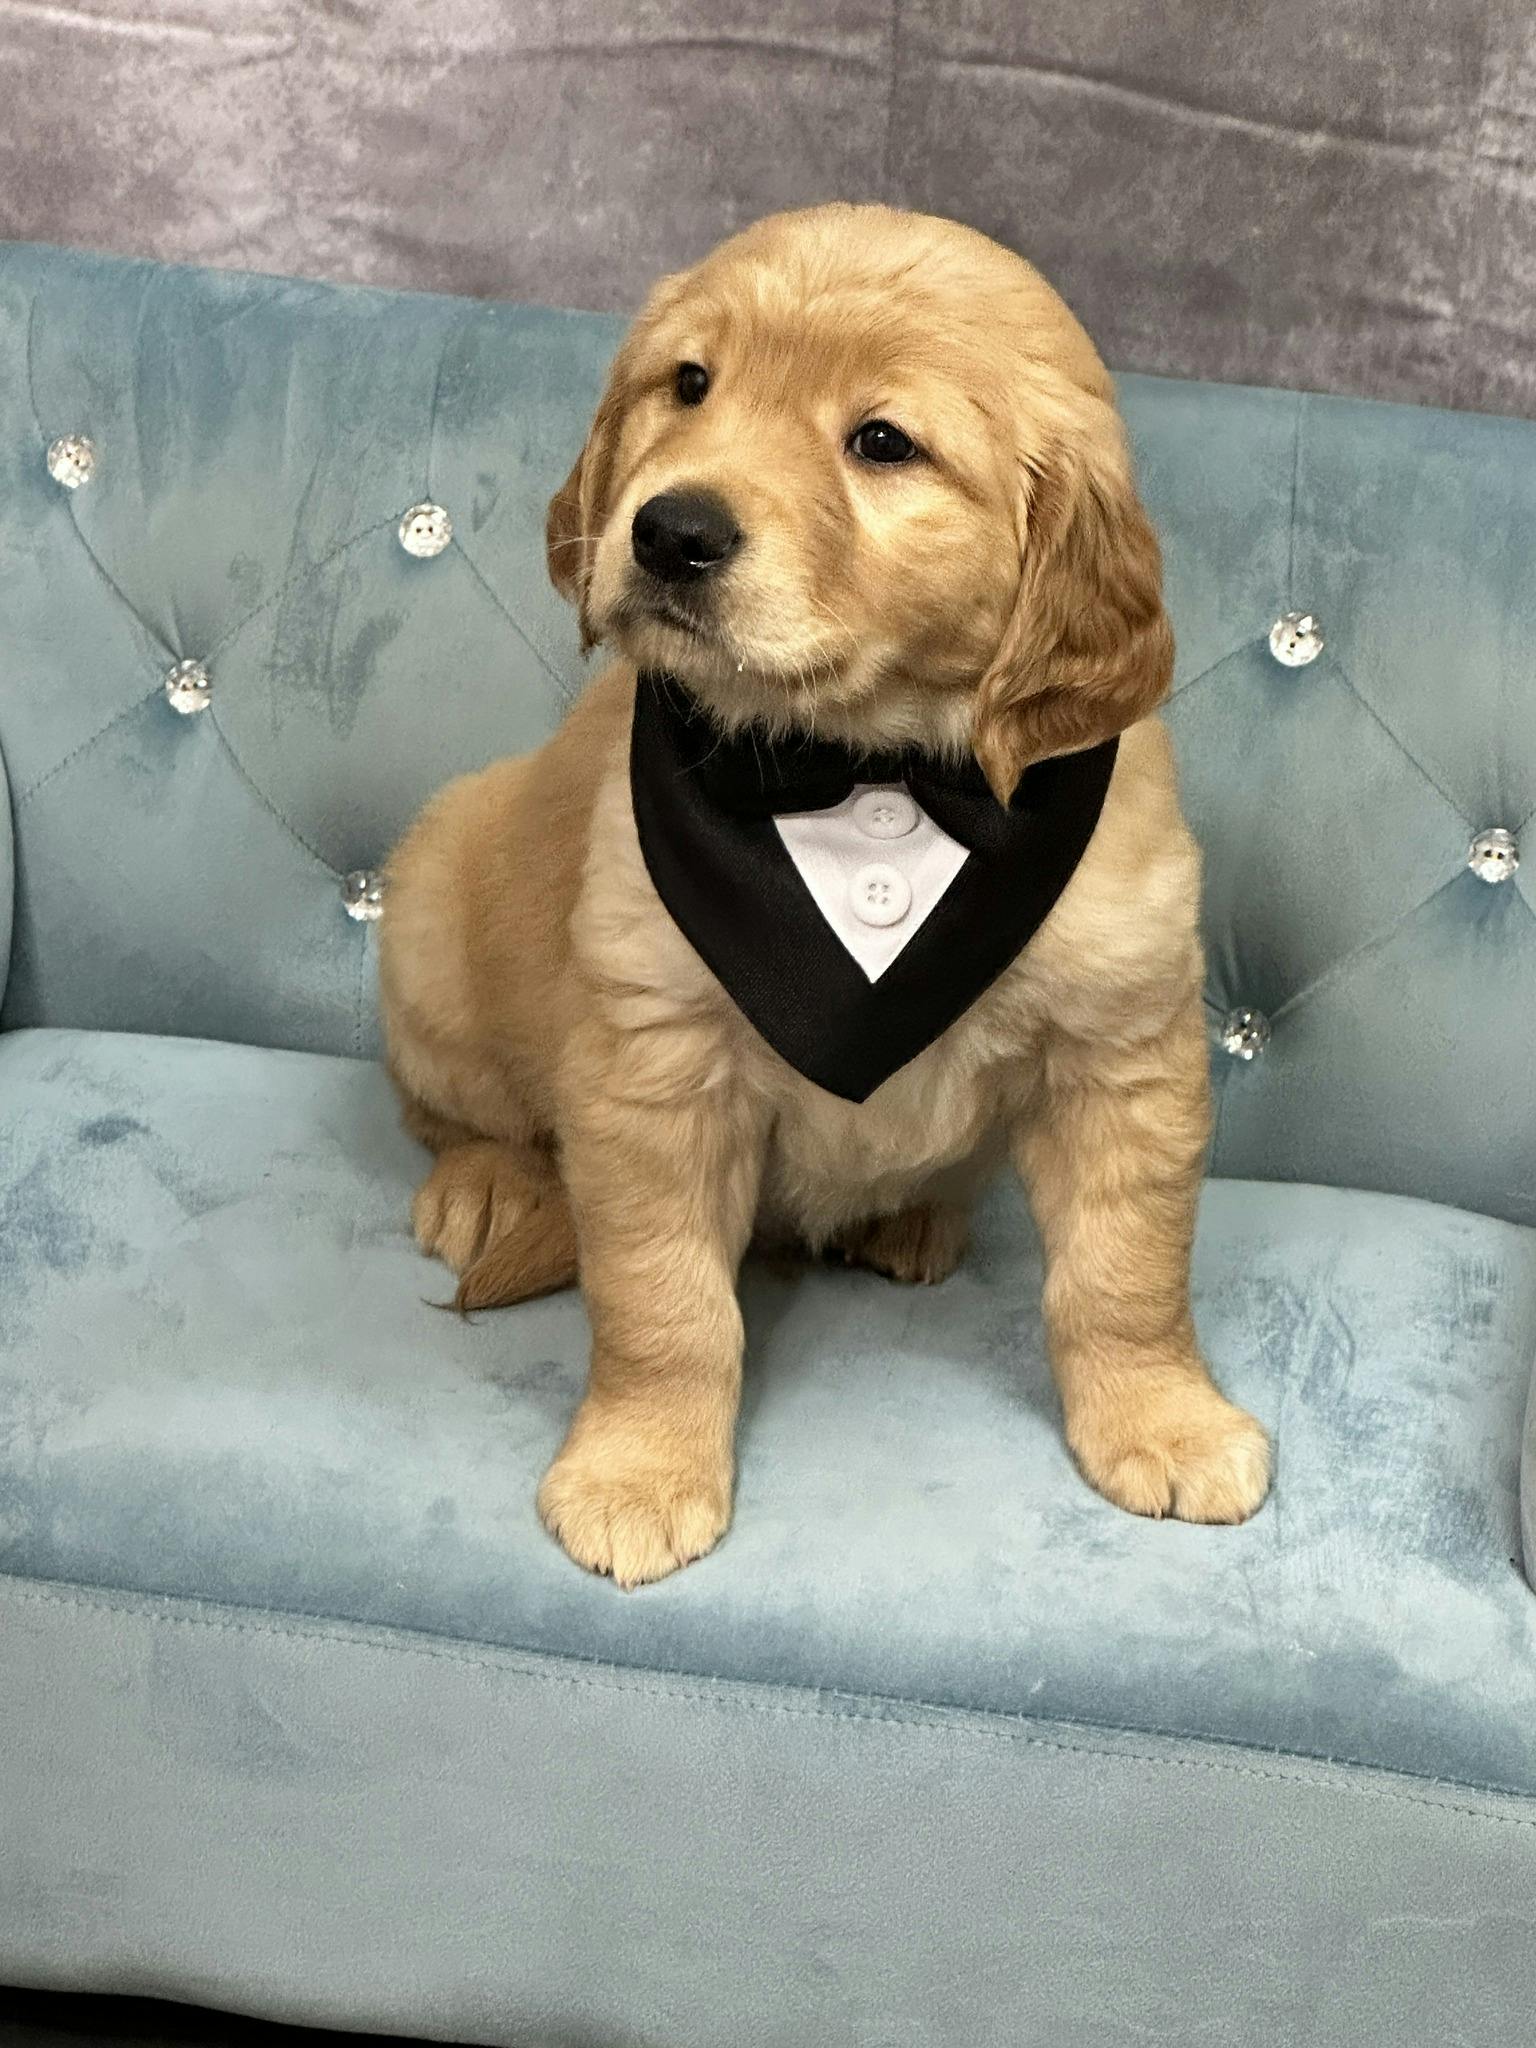 Baby Puppy Golden Retriever sitting on a couch